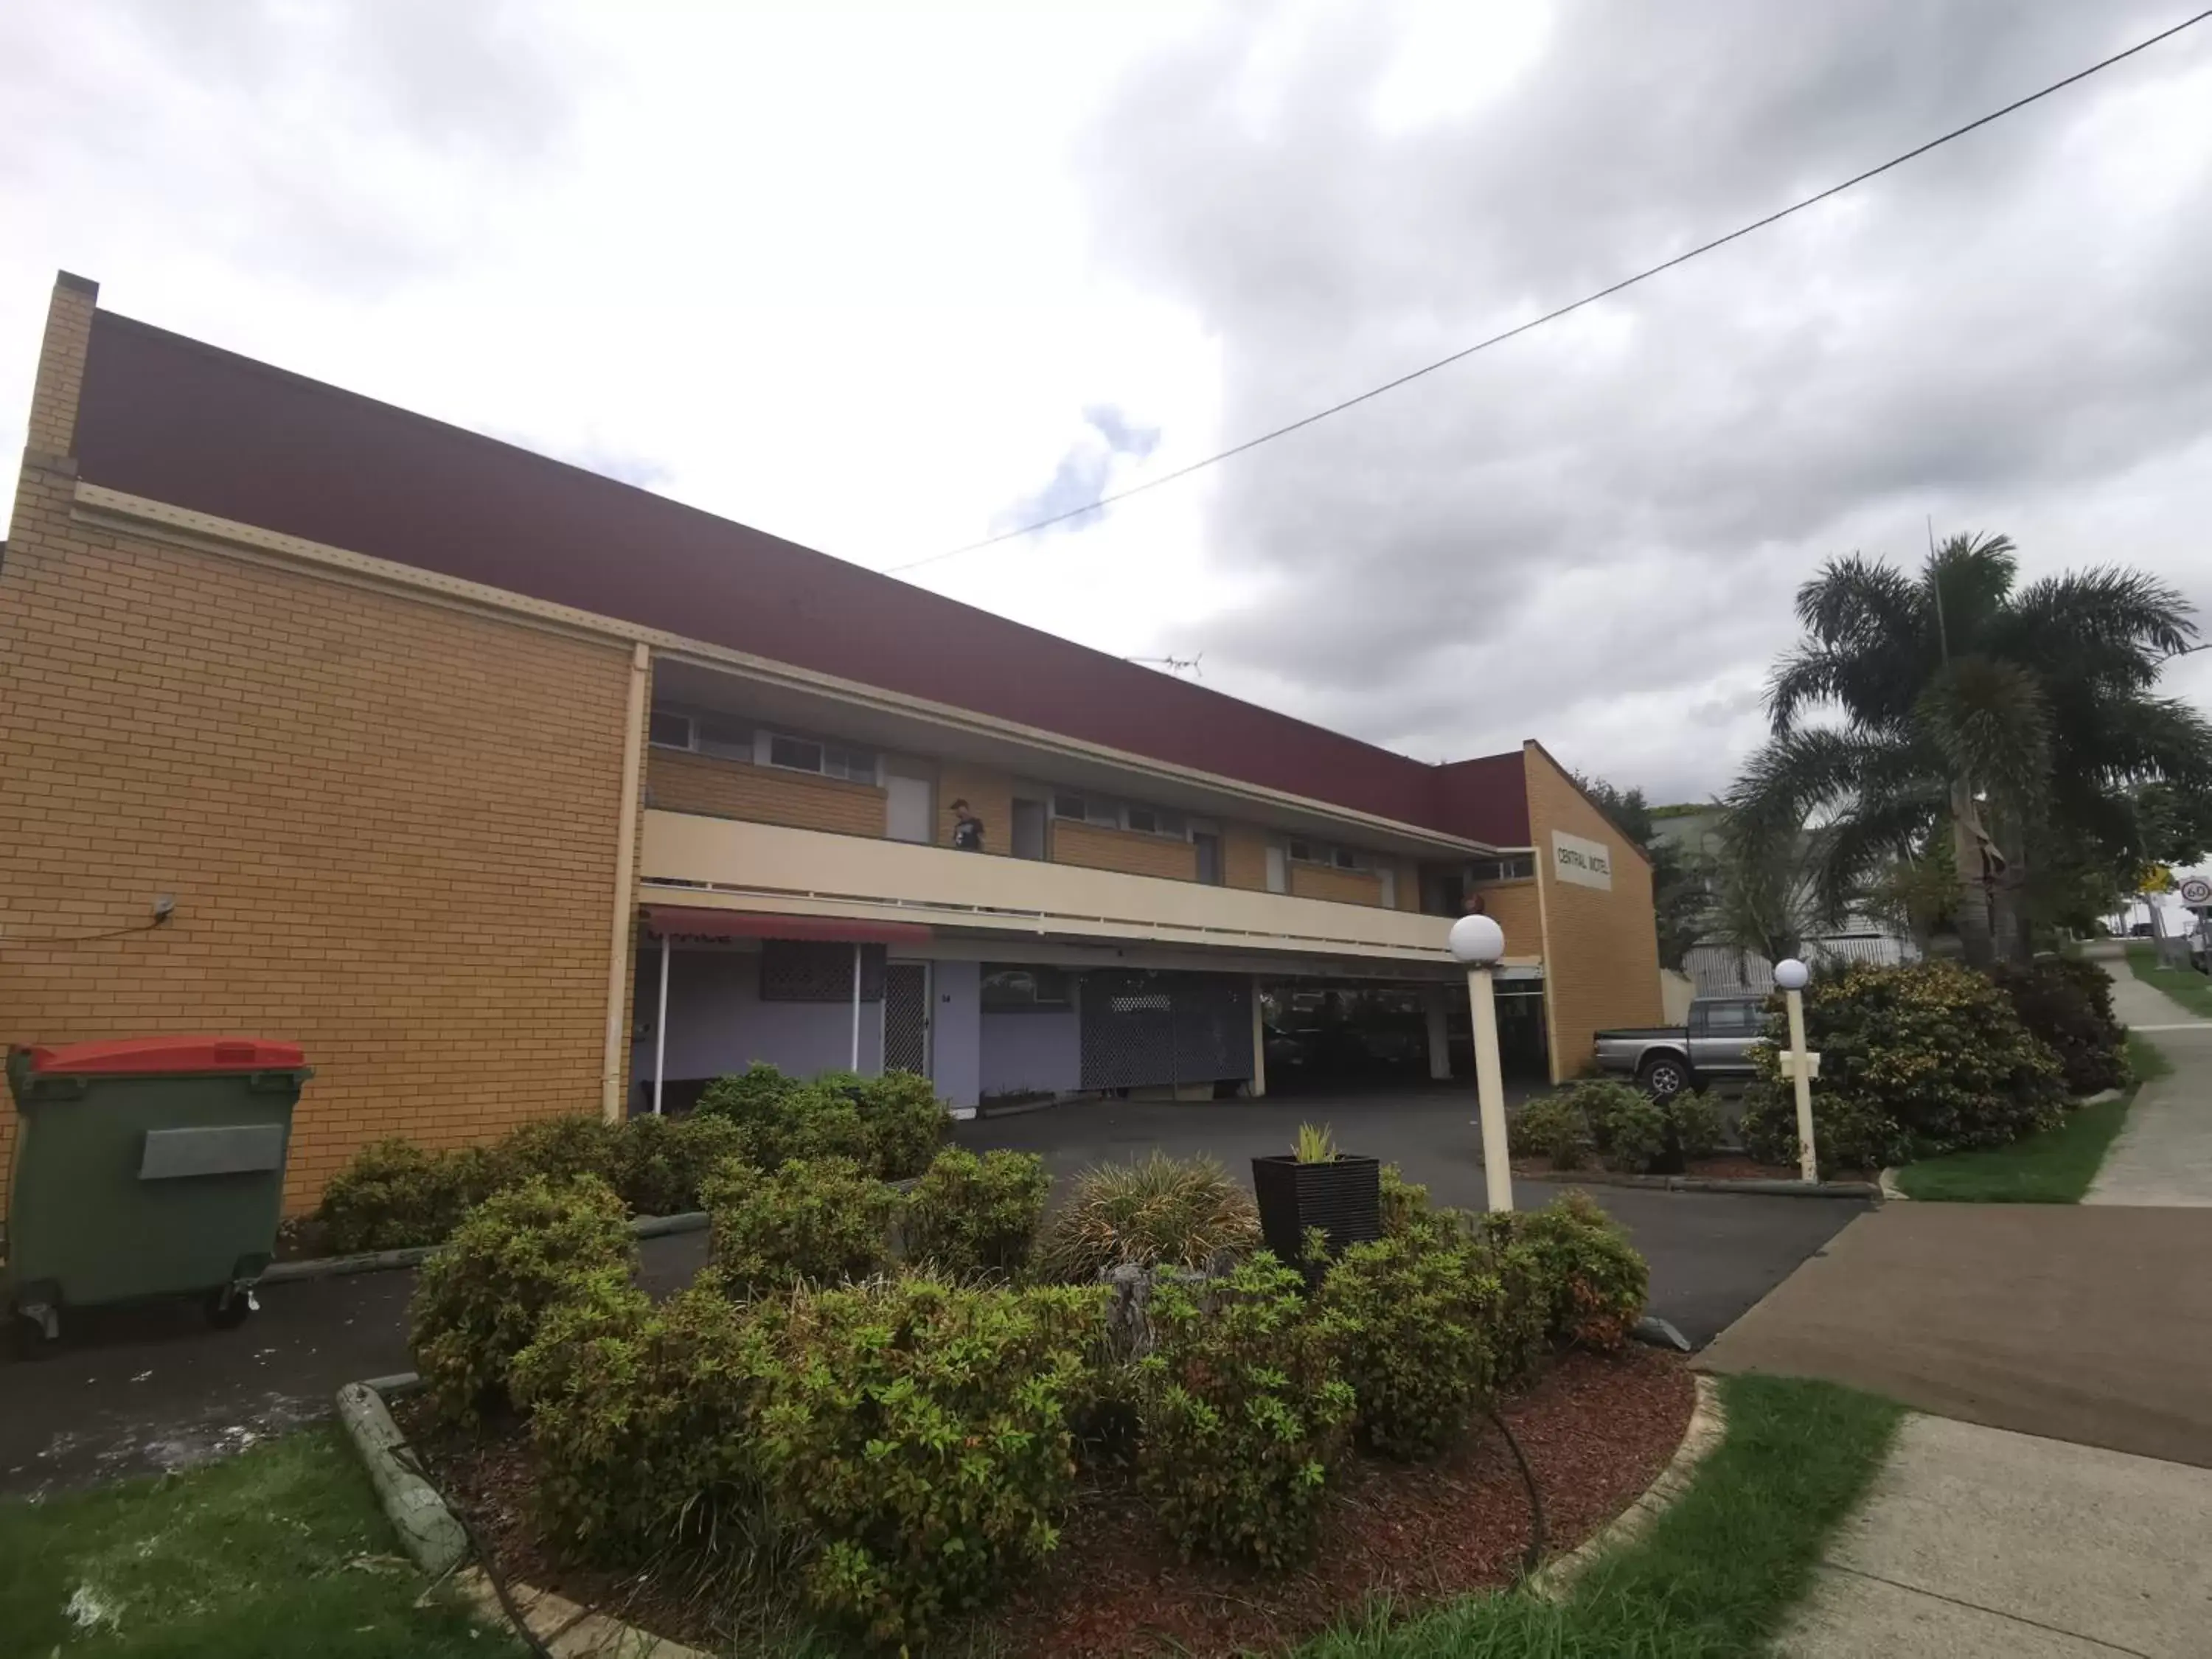 Property Building in Central Motel Ipswich